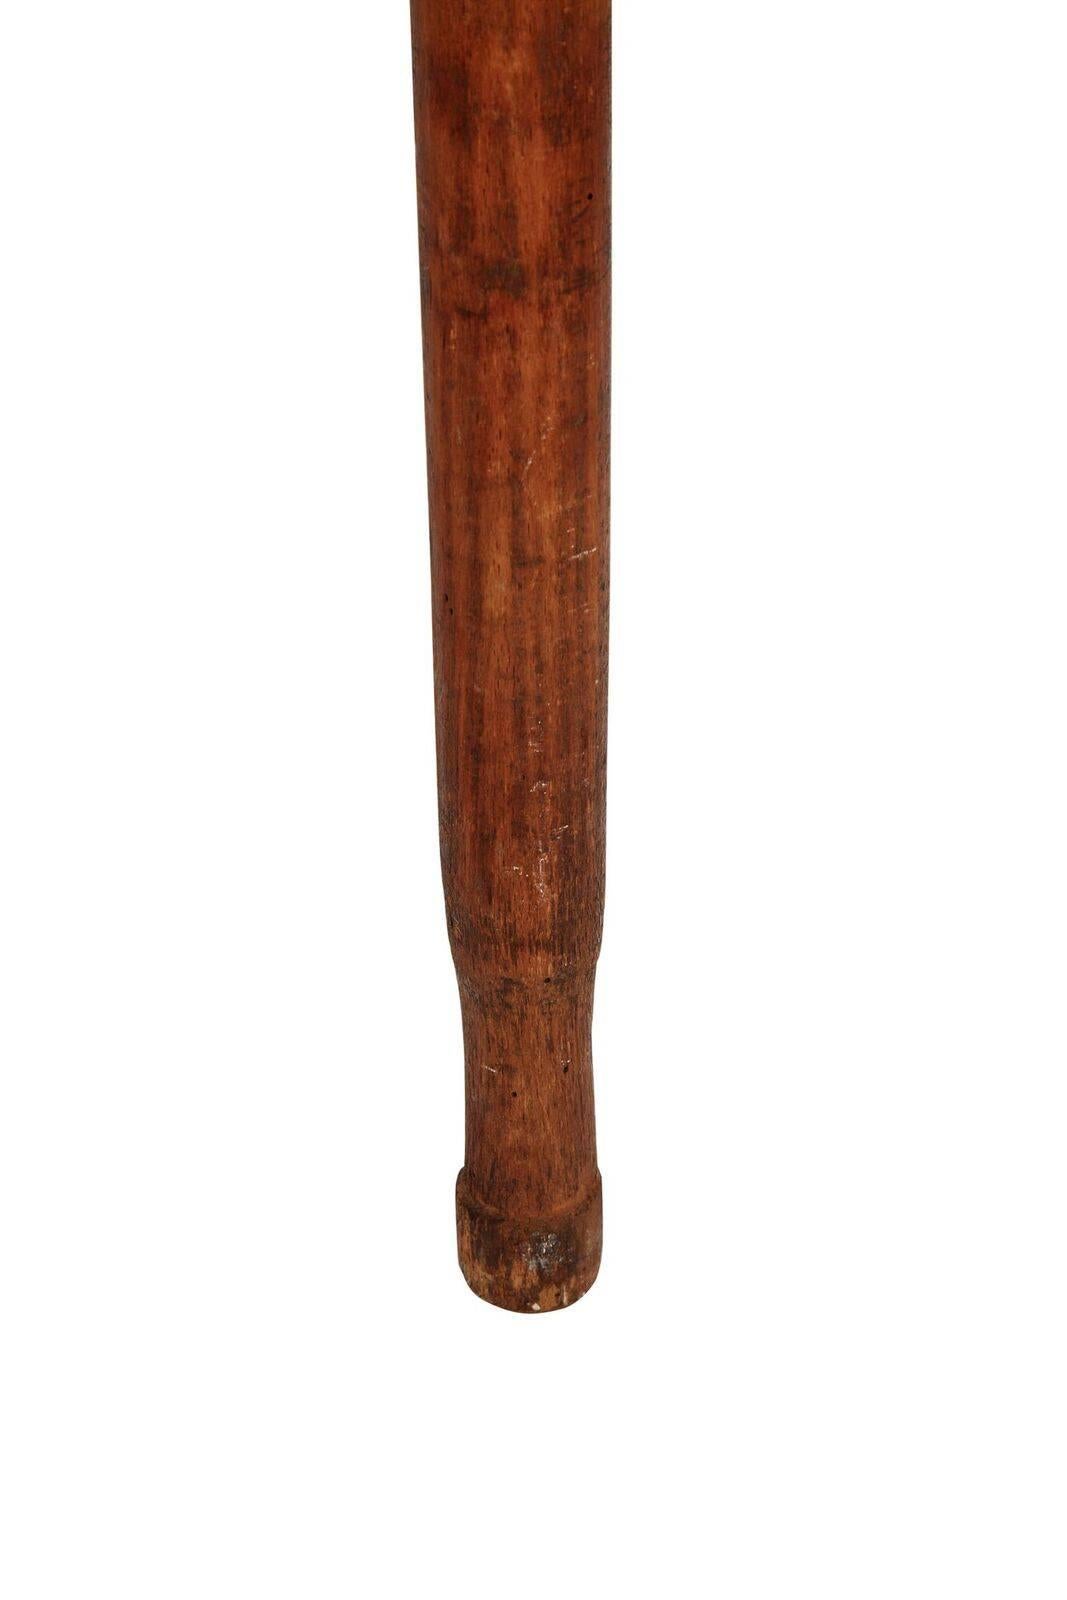 20th century very large wall-mounted African pestle
Measures: 60 inch length x 4.5 inch diameter.